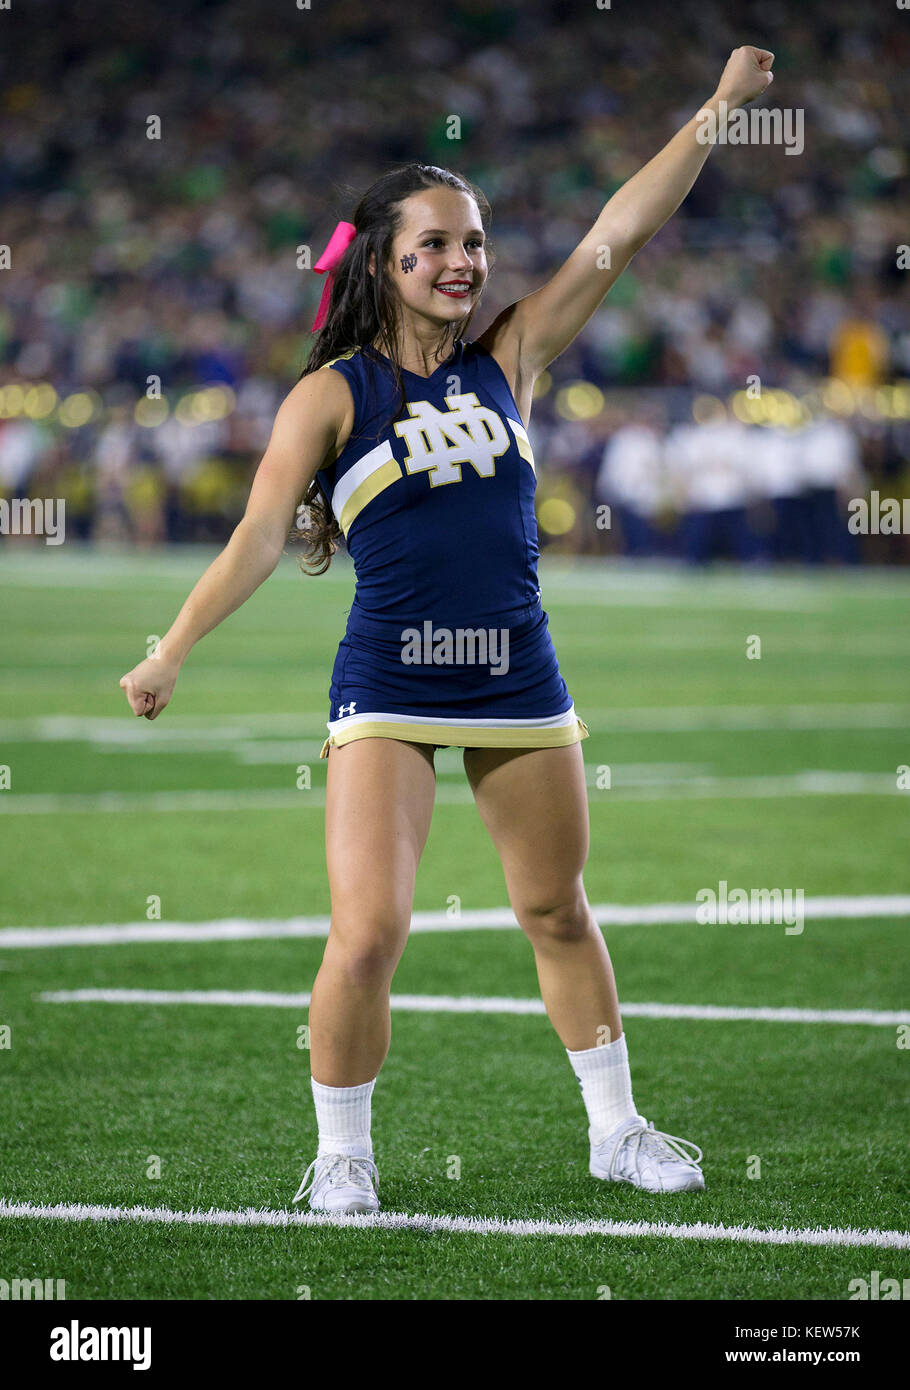 October 21, 2017: Notre Dame cheerleader performs during NCAA football game action between the USC Trojans and the Notre Dame Fighting Irish at Notre Dame Stadium in South Bend, Indiana. Notre Dame defeated USC 49-14. John Mersits/CSM. Stock Photo